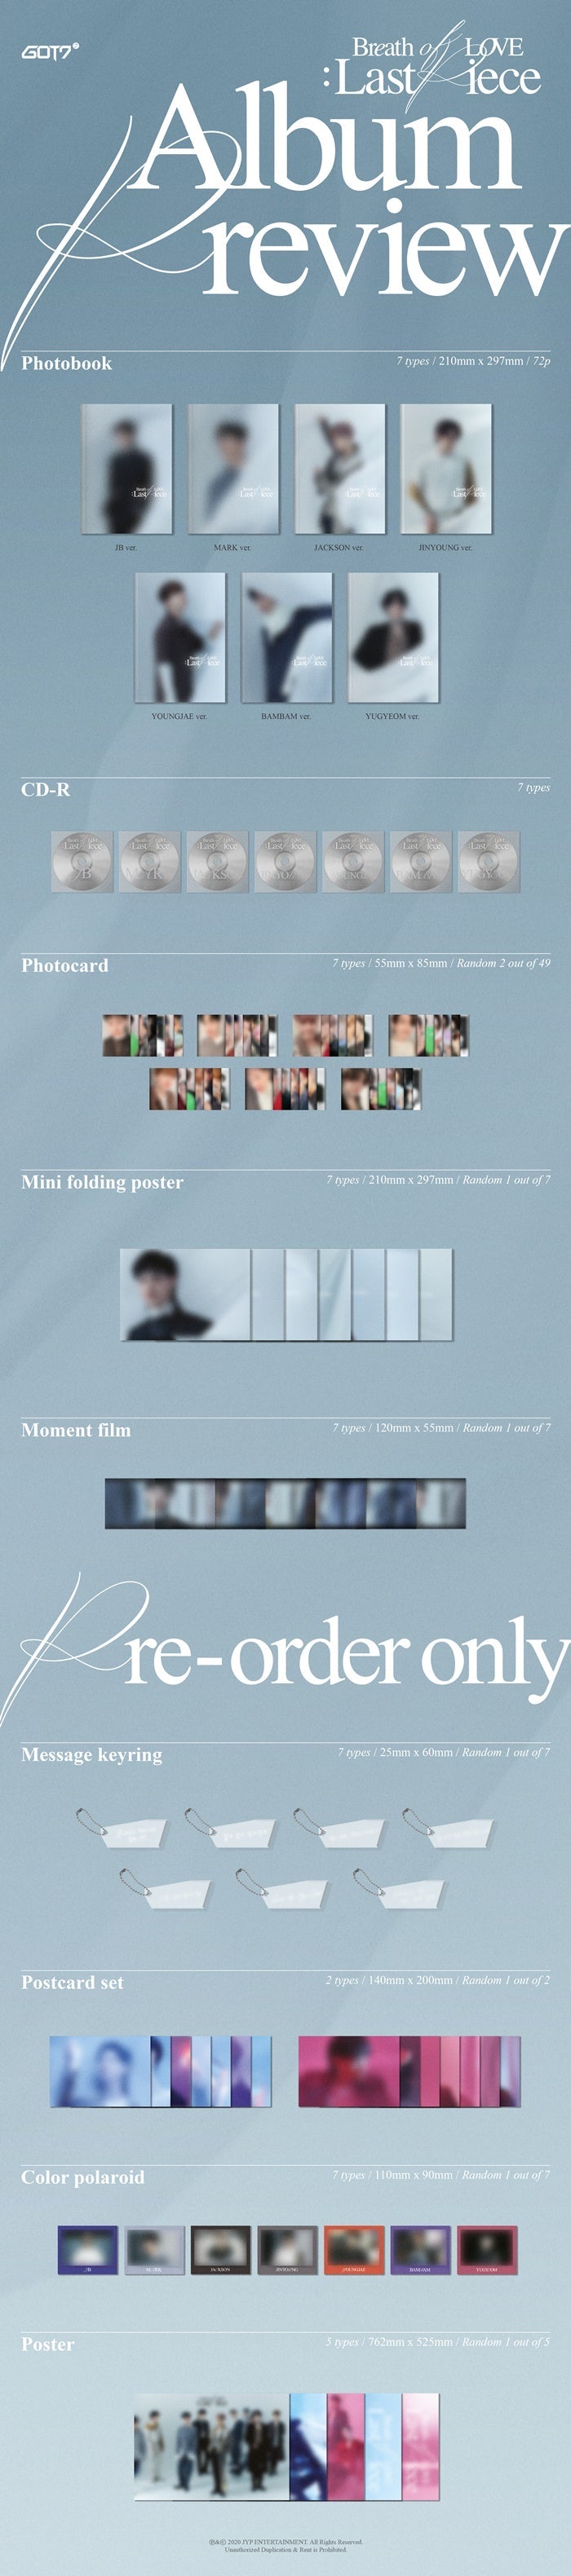 1 CD
1 Photo Book (72 pages)
2 Photo Cards
1 Mini Folding Poster
1 Moment Film